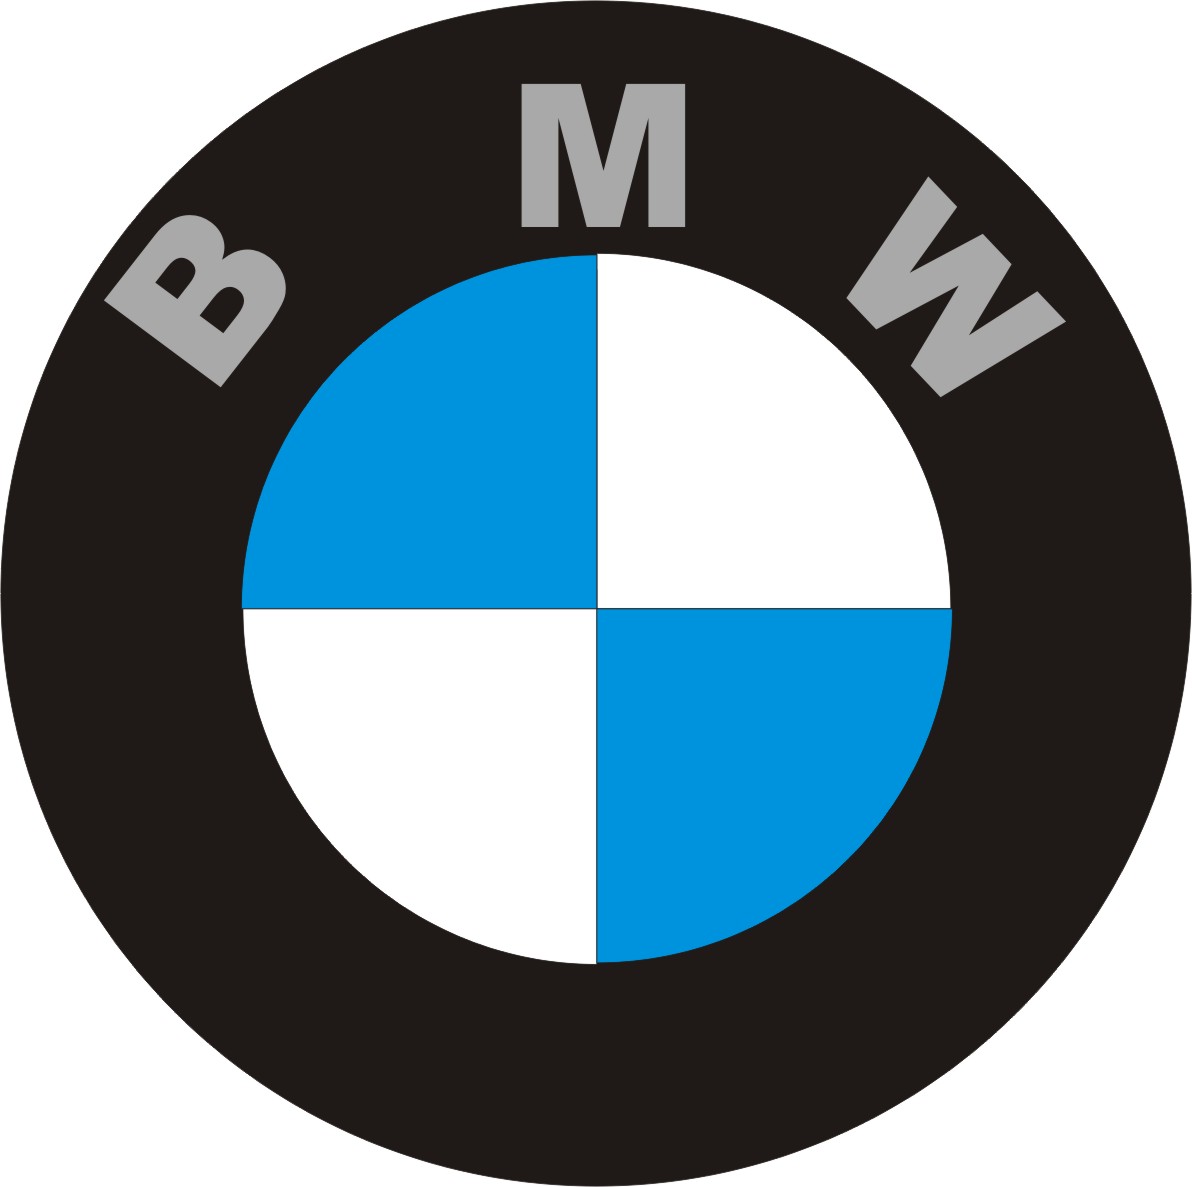 What is the meaning of bmw car logo #3